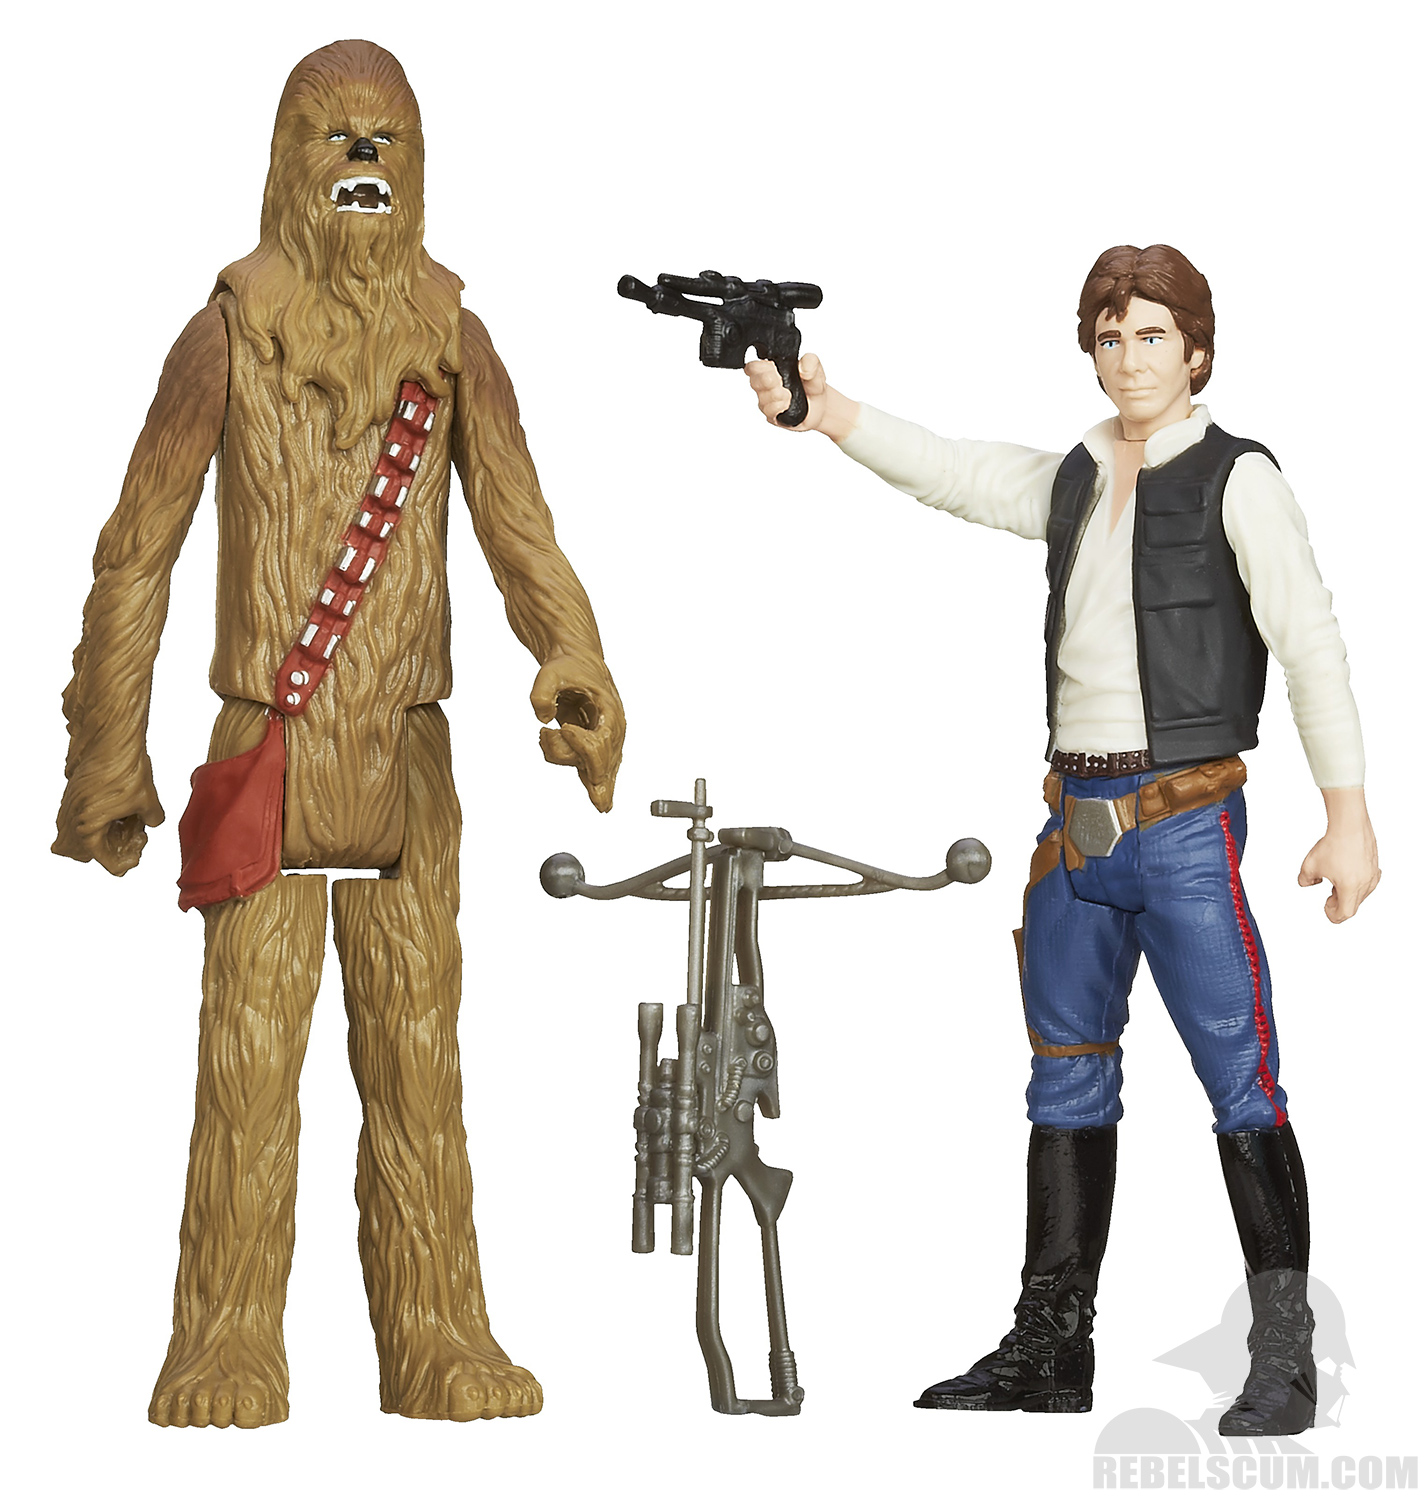 Hasbro Star Wars Mission Series Two Packs